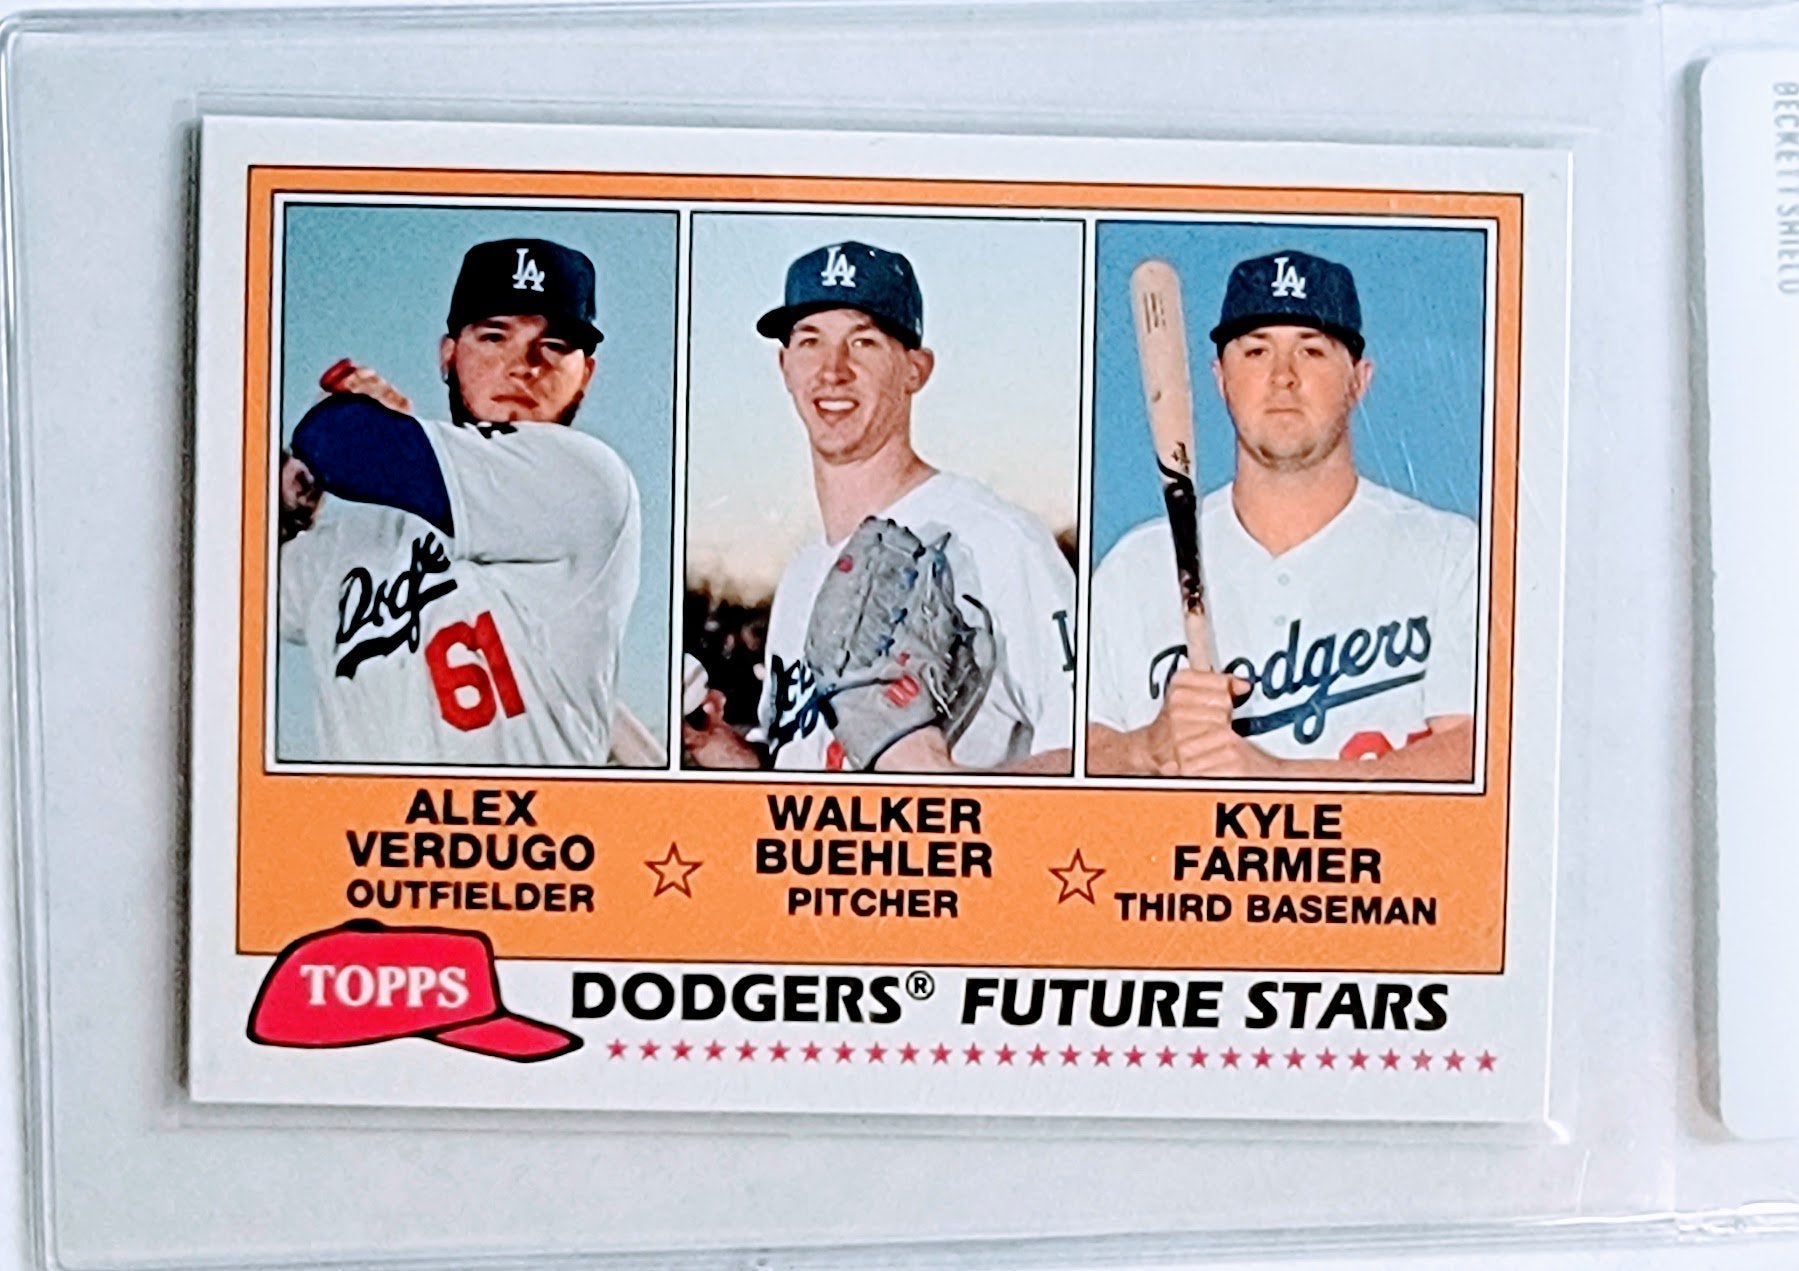 2018 Topps Heritage Alex Verdugo, Walker Buehler & Kyle Farmer Dodgers Future Stars Rookie Baseball Trading Card TPTV simple Xclusive Collectibles   